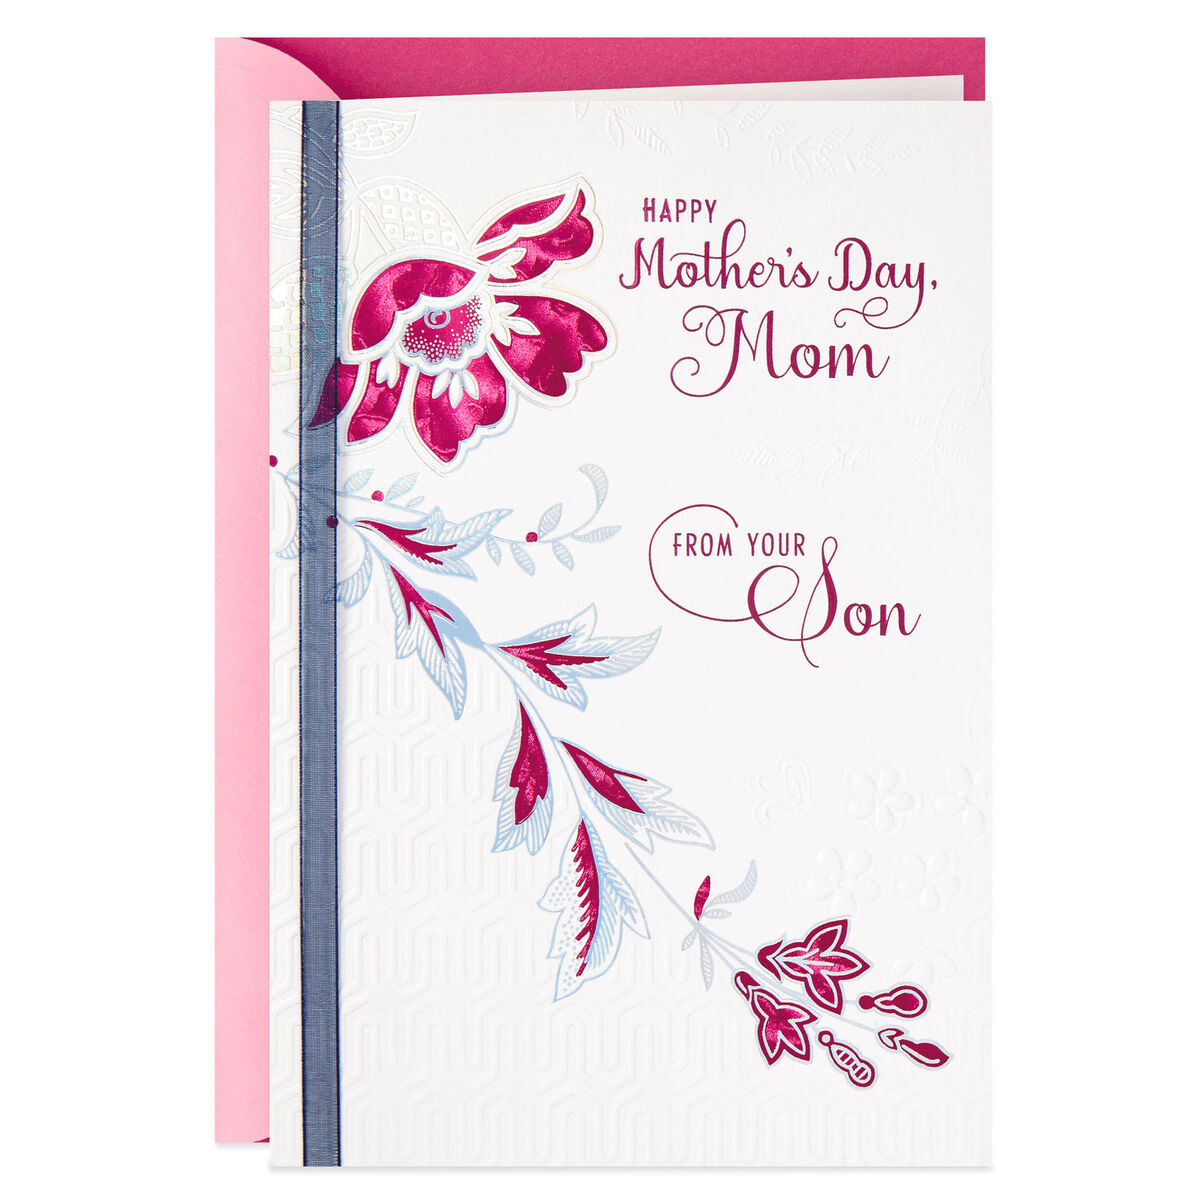 Lucky to Be Your Son Mother's Day Card for Mom - Greeting Cards - Hallmark